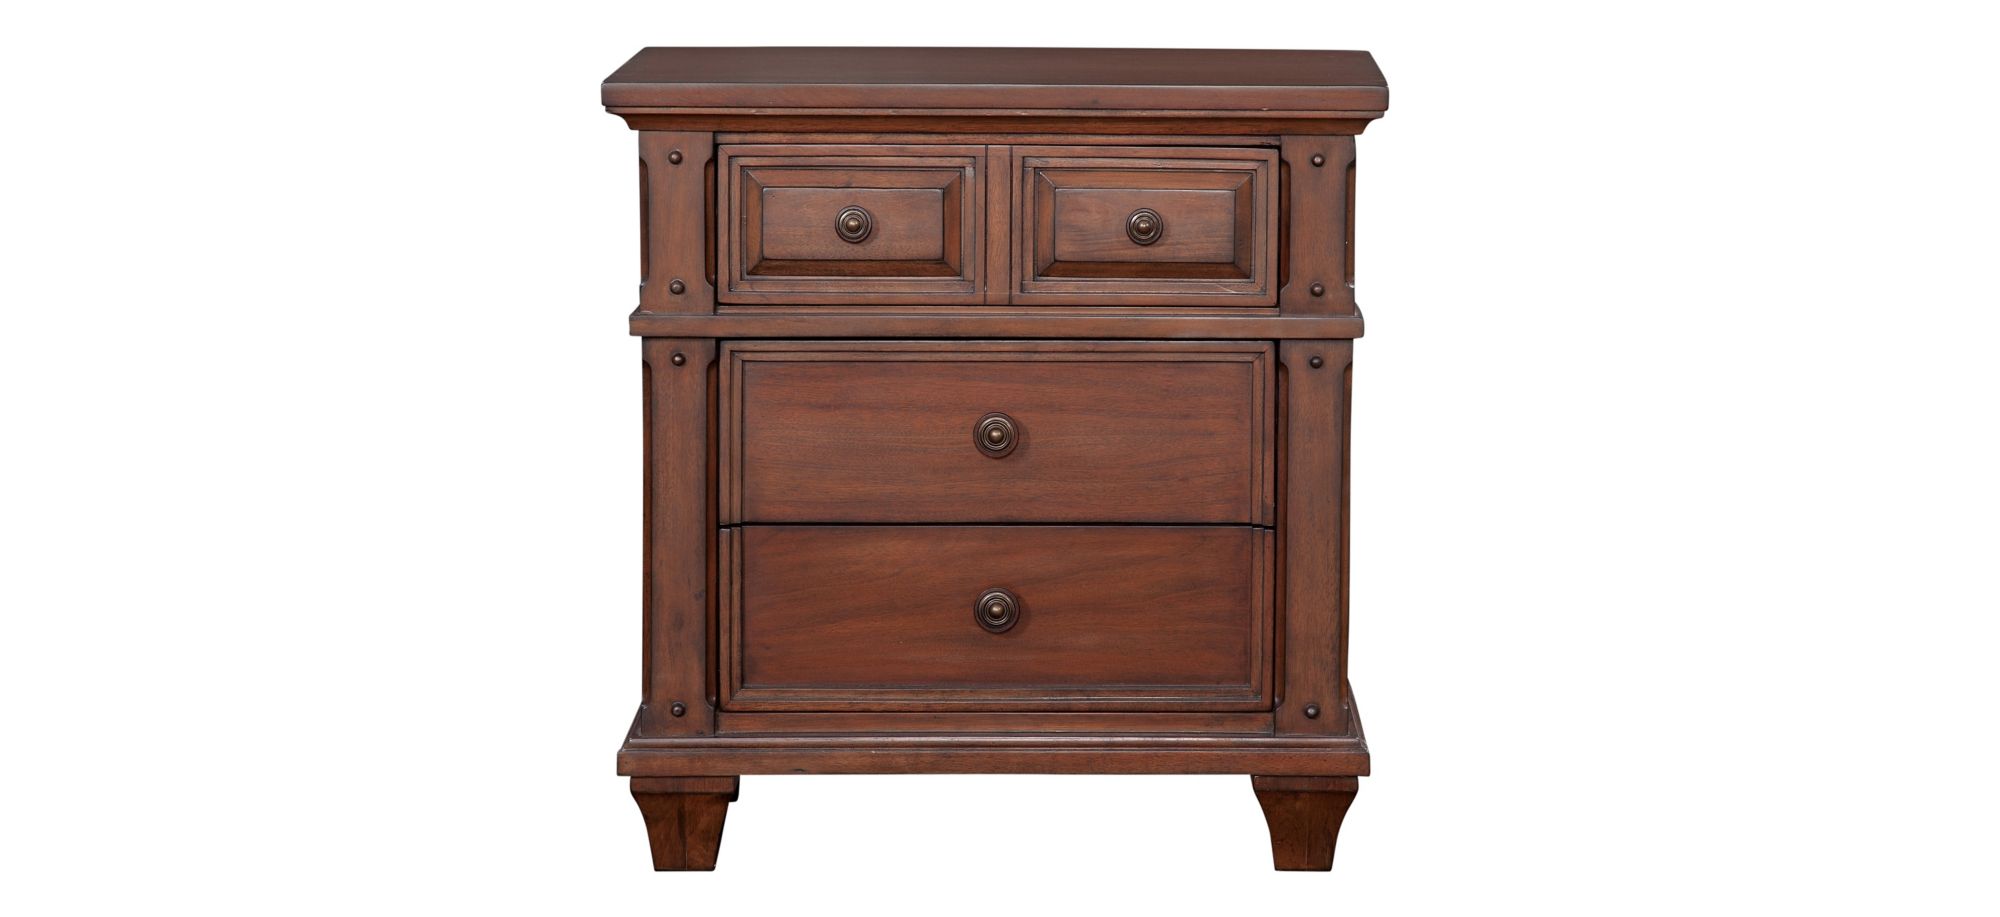 Sedona Nightstand in Cinnamon Cherry by American Woodcrafters